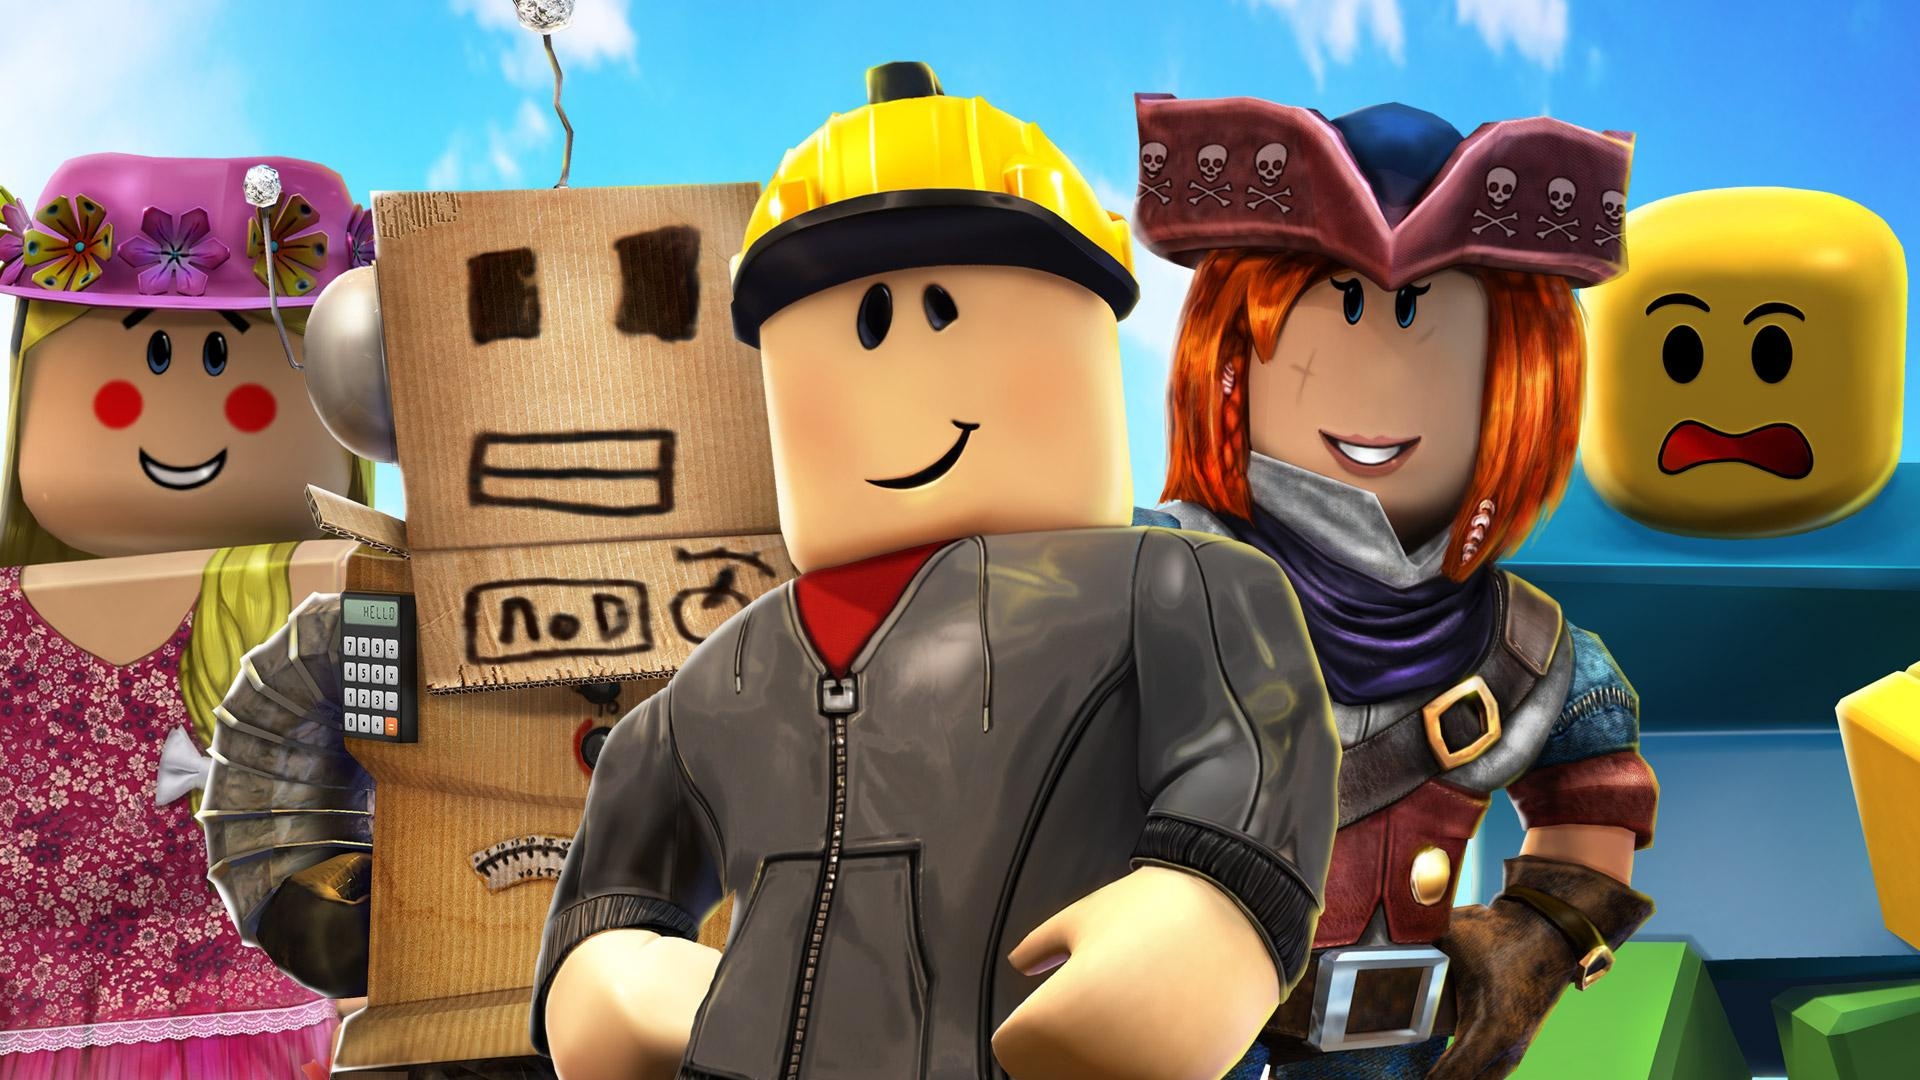 Roblox is more popular then ever but some players are experiencing issues, that's why we will cover how to fix error code 103 Roblox on Xbox today.